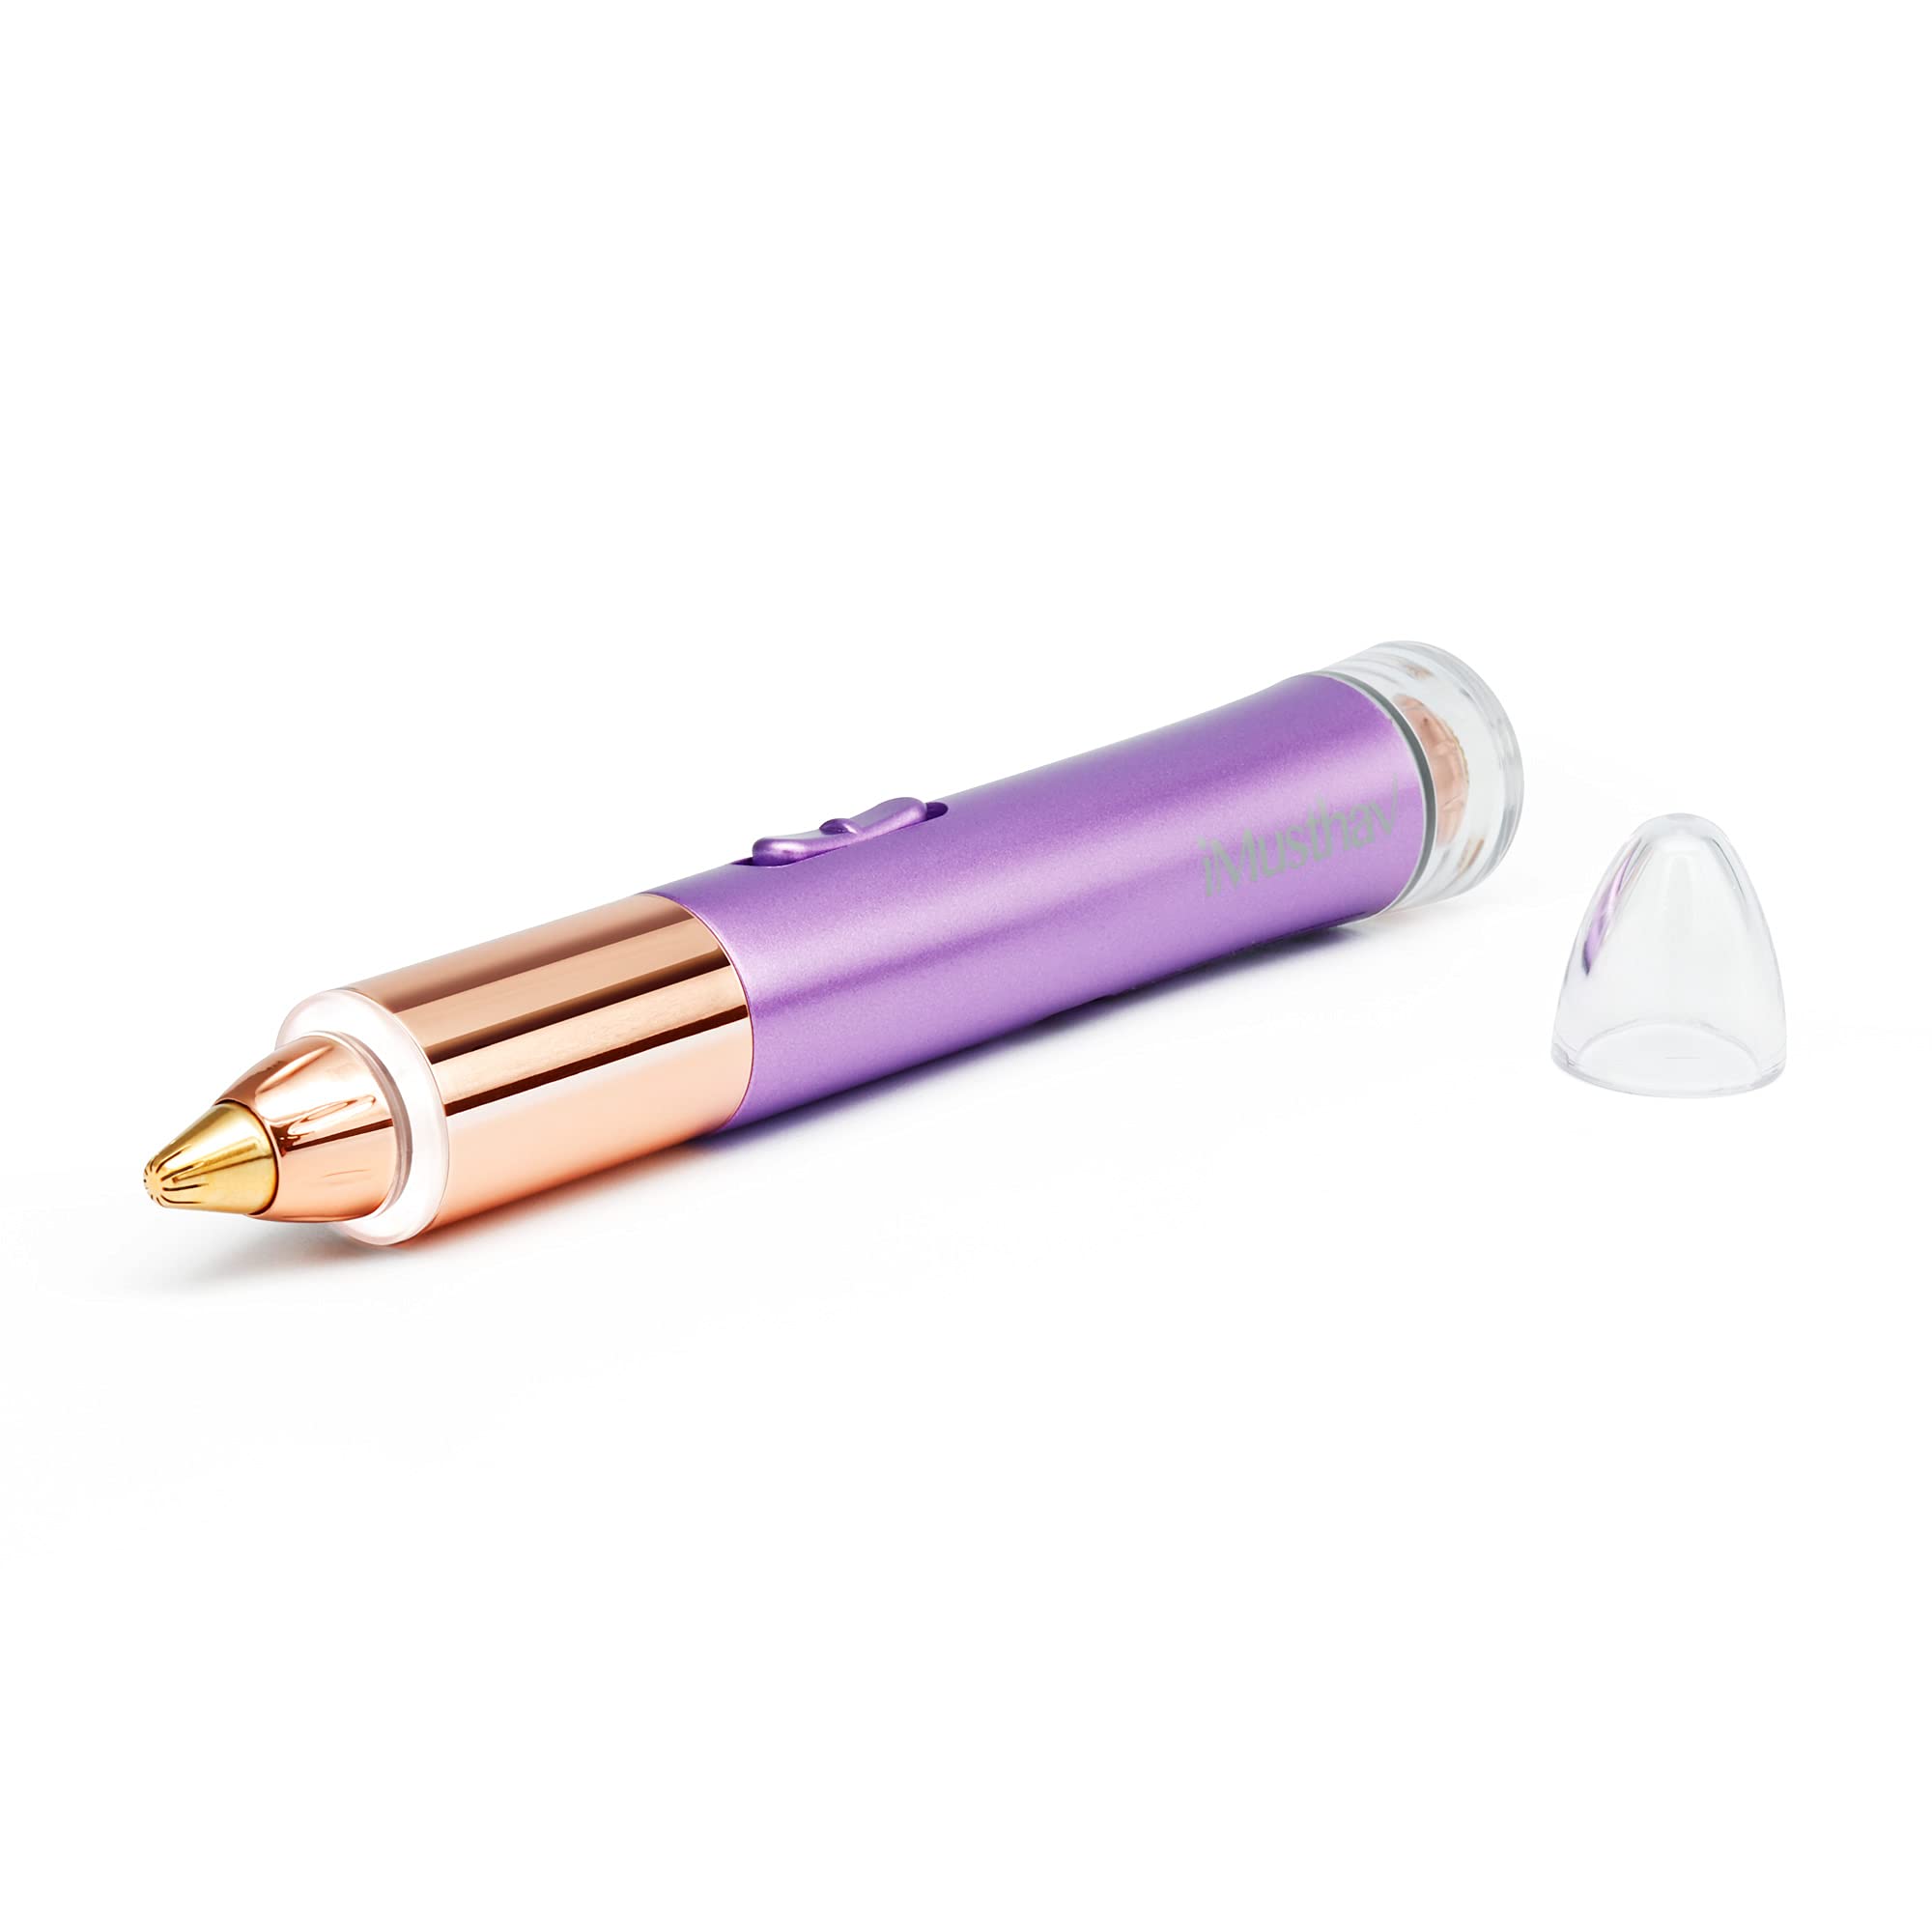 iMusthav Dual Function Brow & Facial Hair Remover USB Rechargeable. Precision “Pencil-tip” 18K Gold Plated Heads 360-degree LED Light. All Your Facial Hair Removal Needs in one Unit (Amethyst)